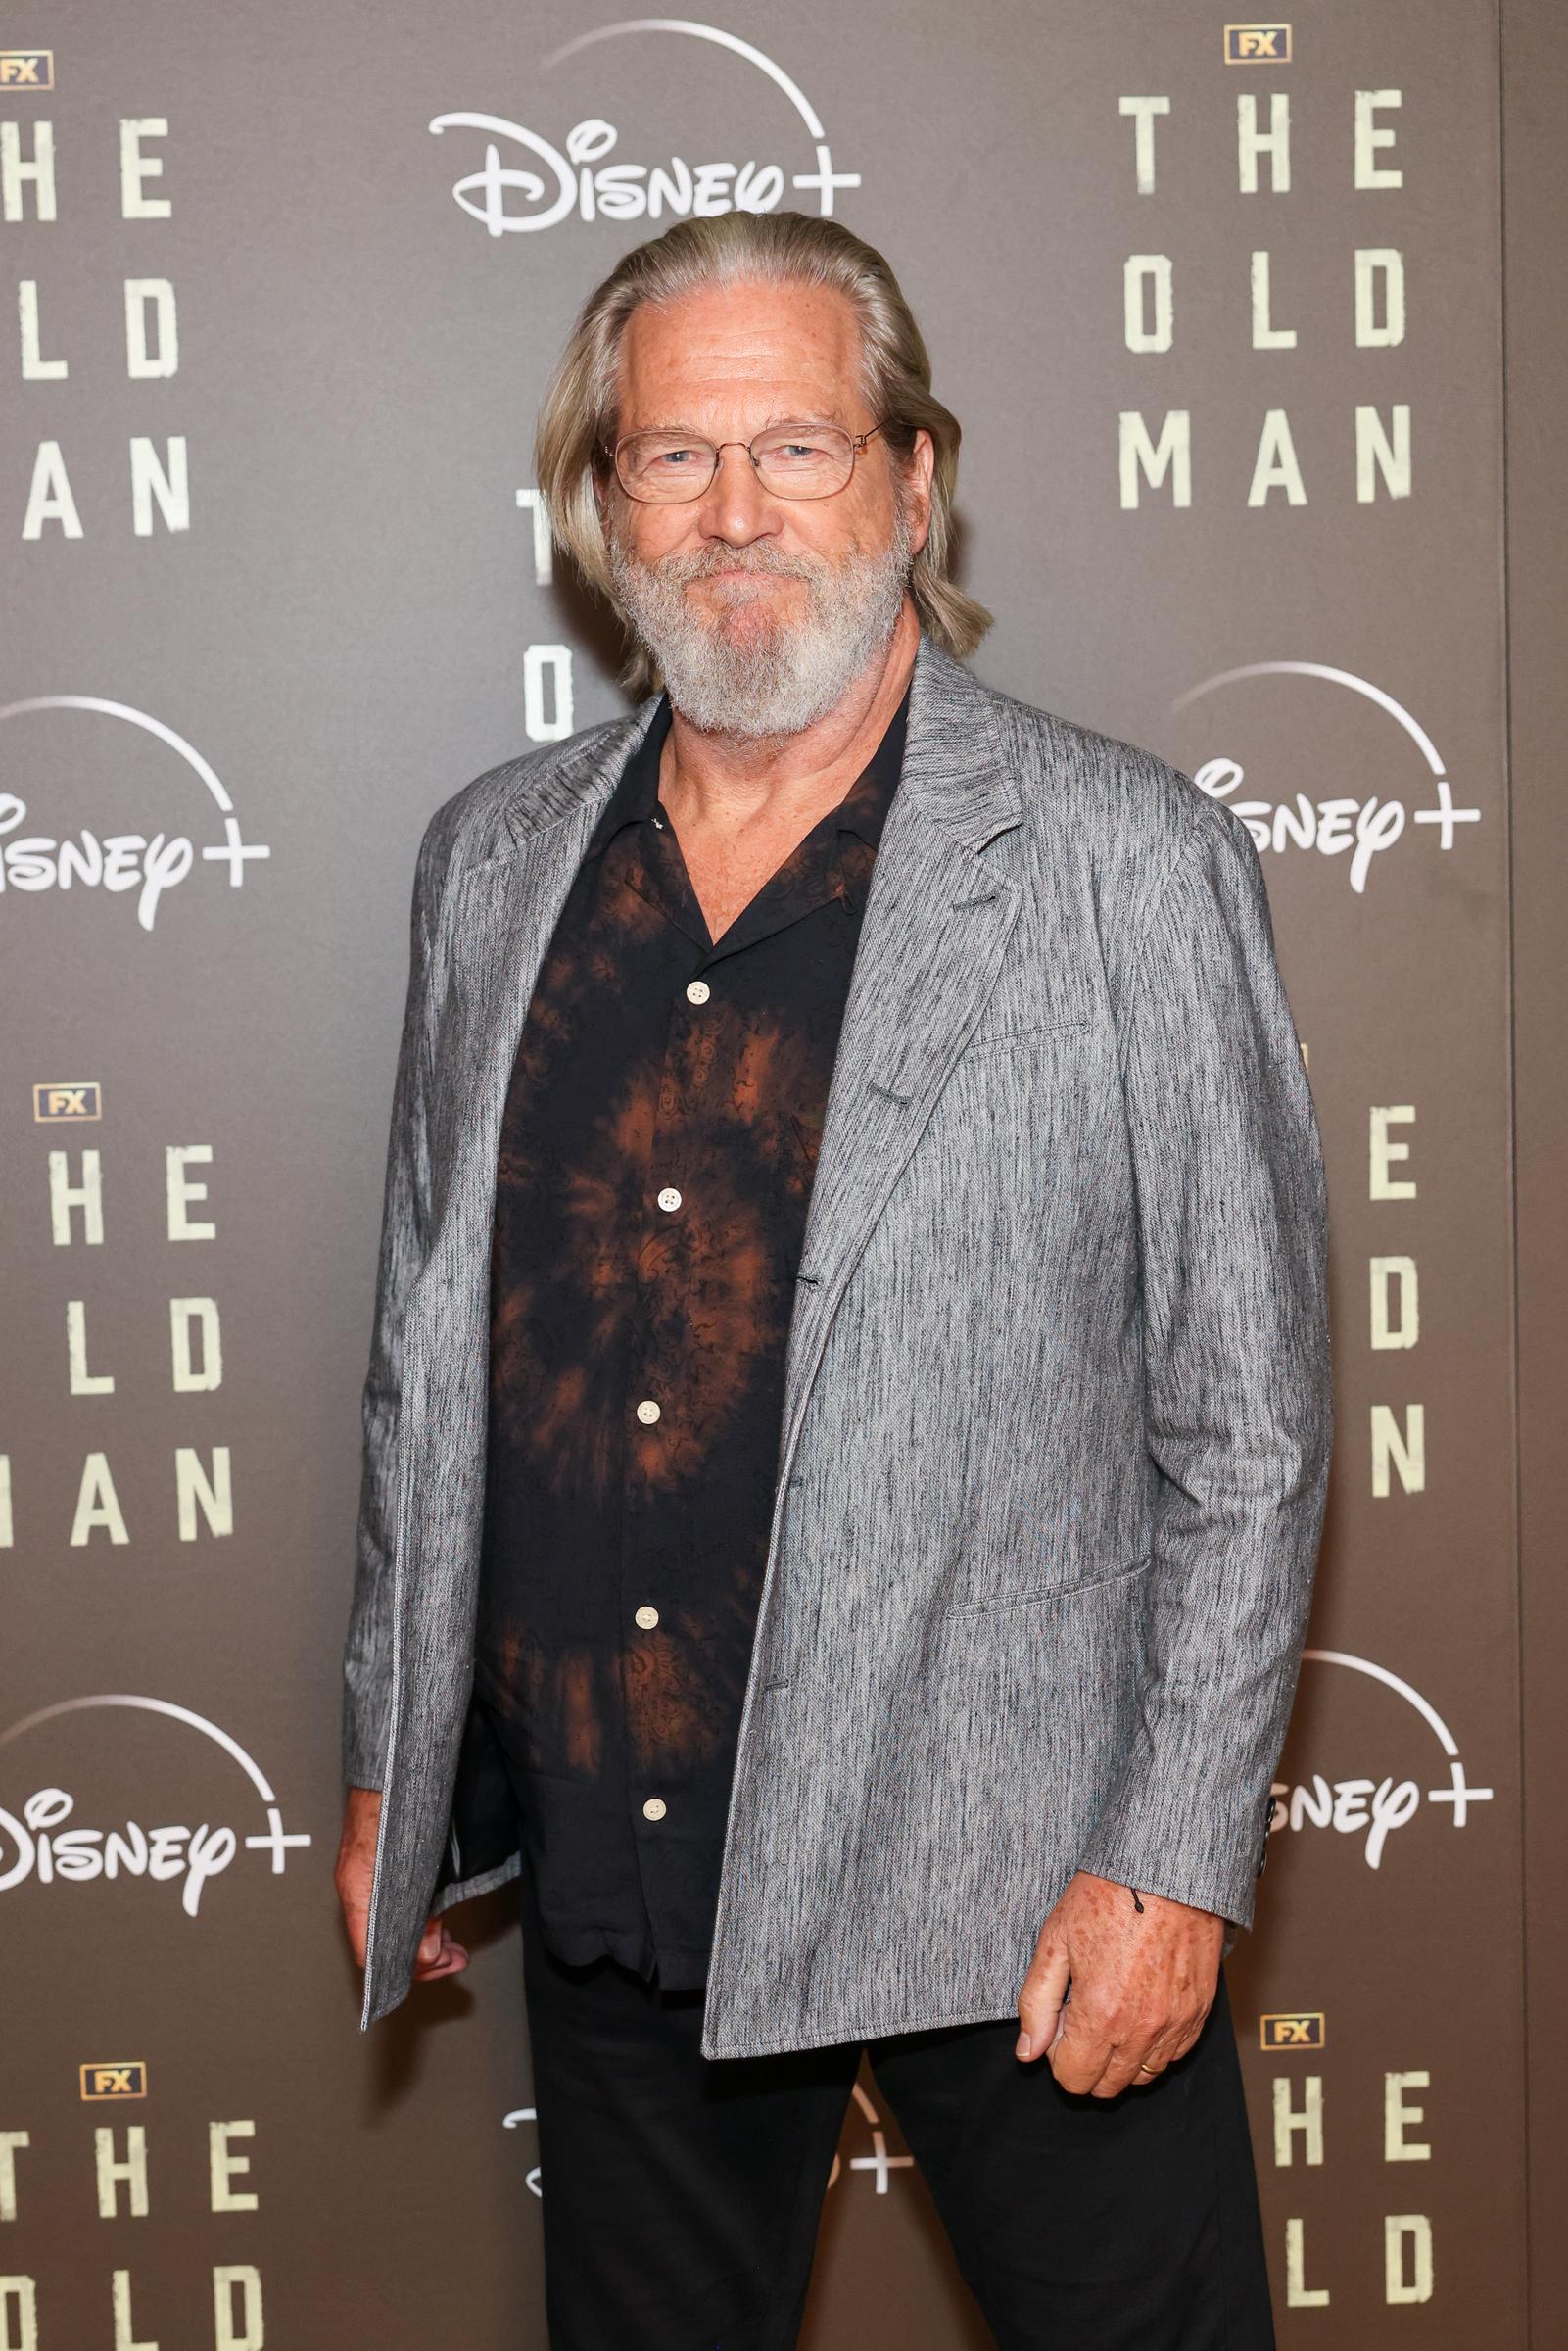 Jeff Bridges attends "The Old Man" screening, with special guest in London, England, on September 22, 2022. | Source: Getty Images